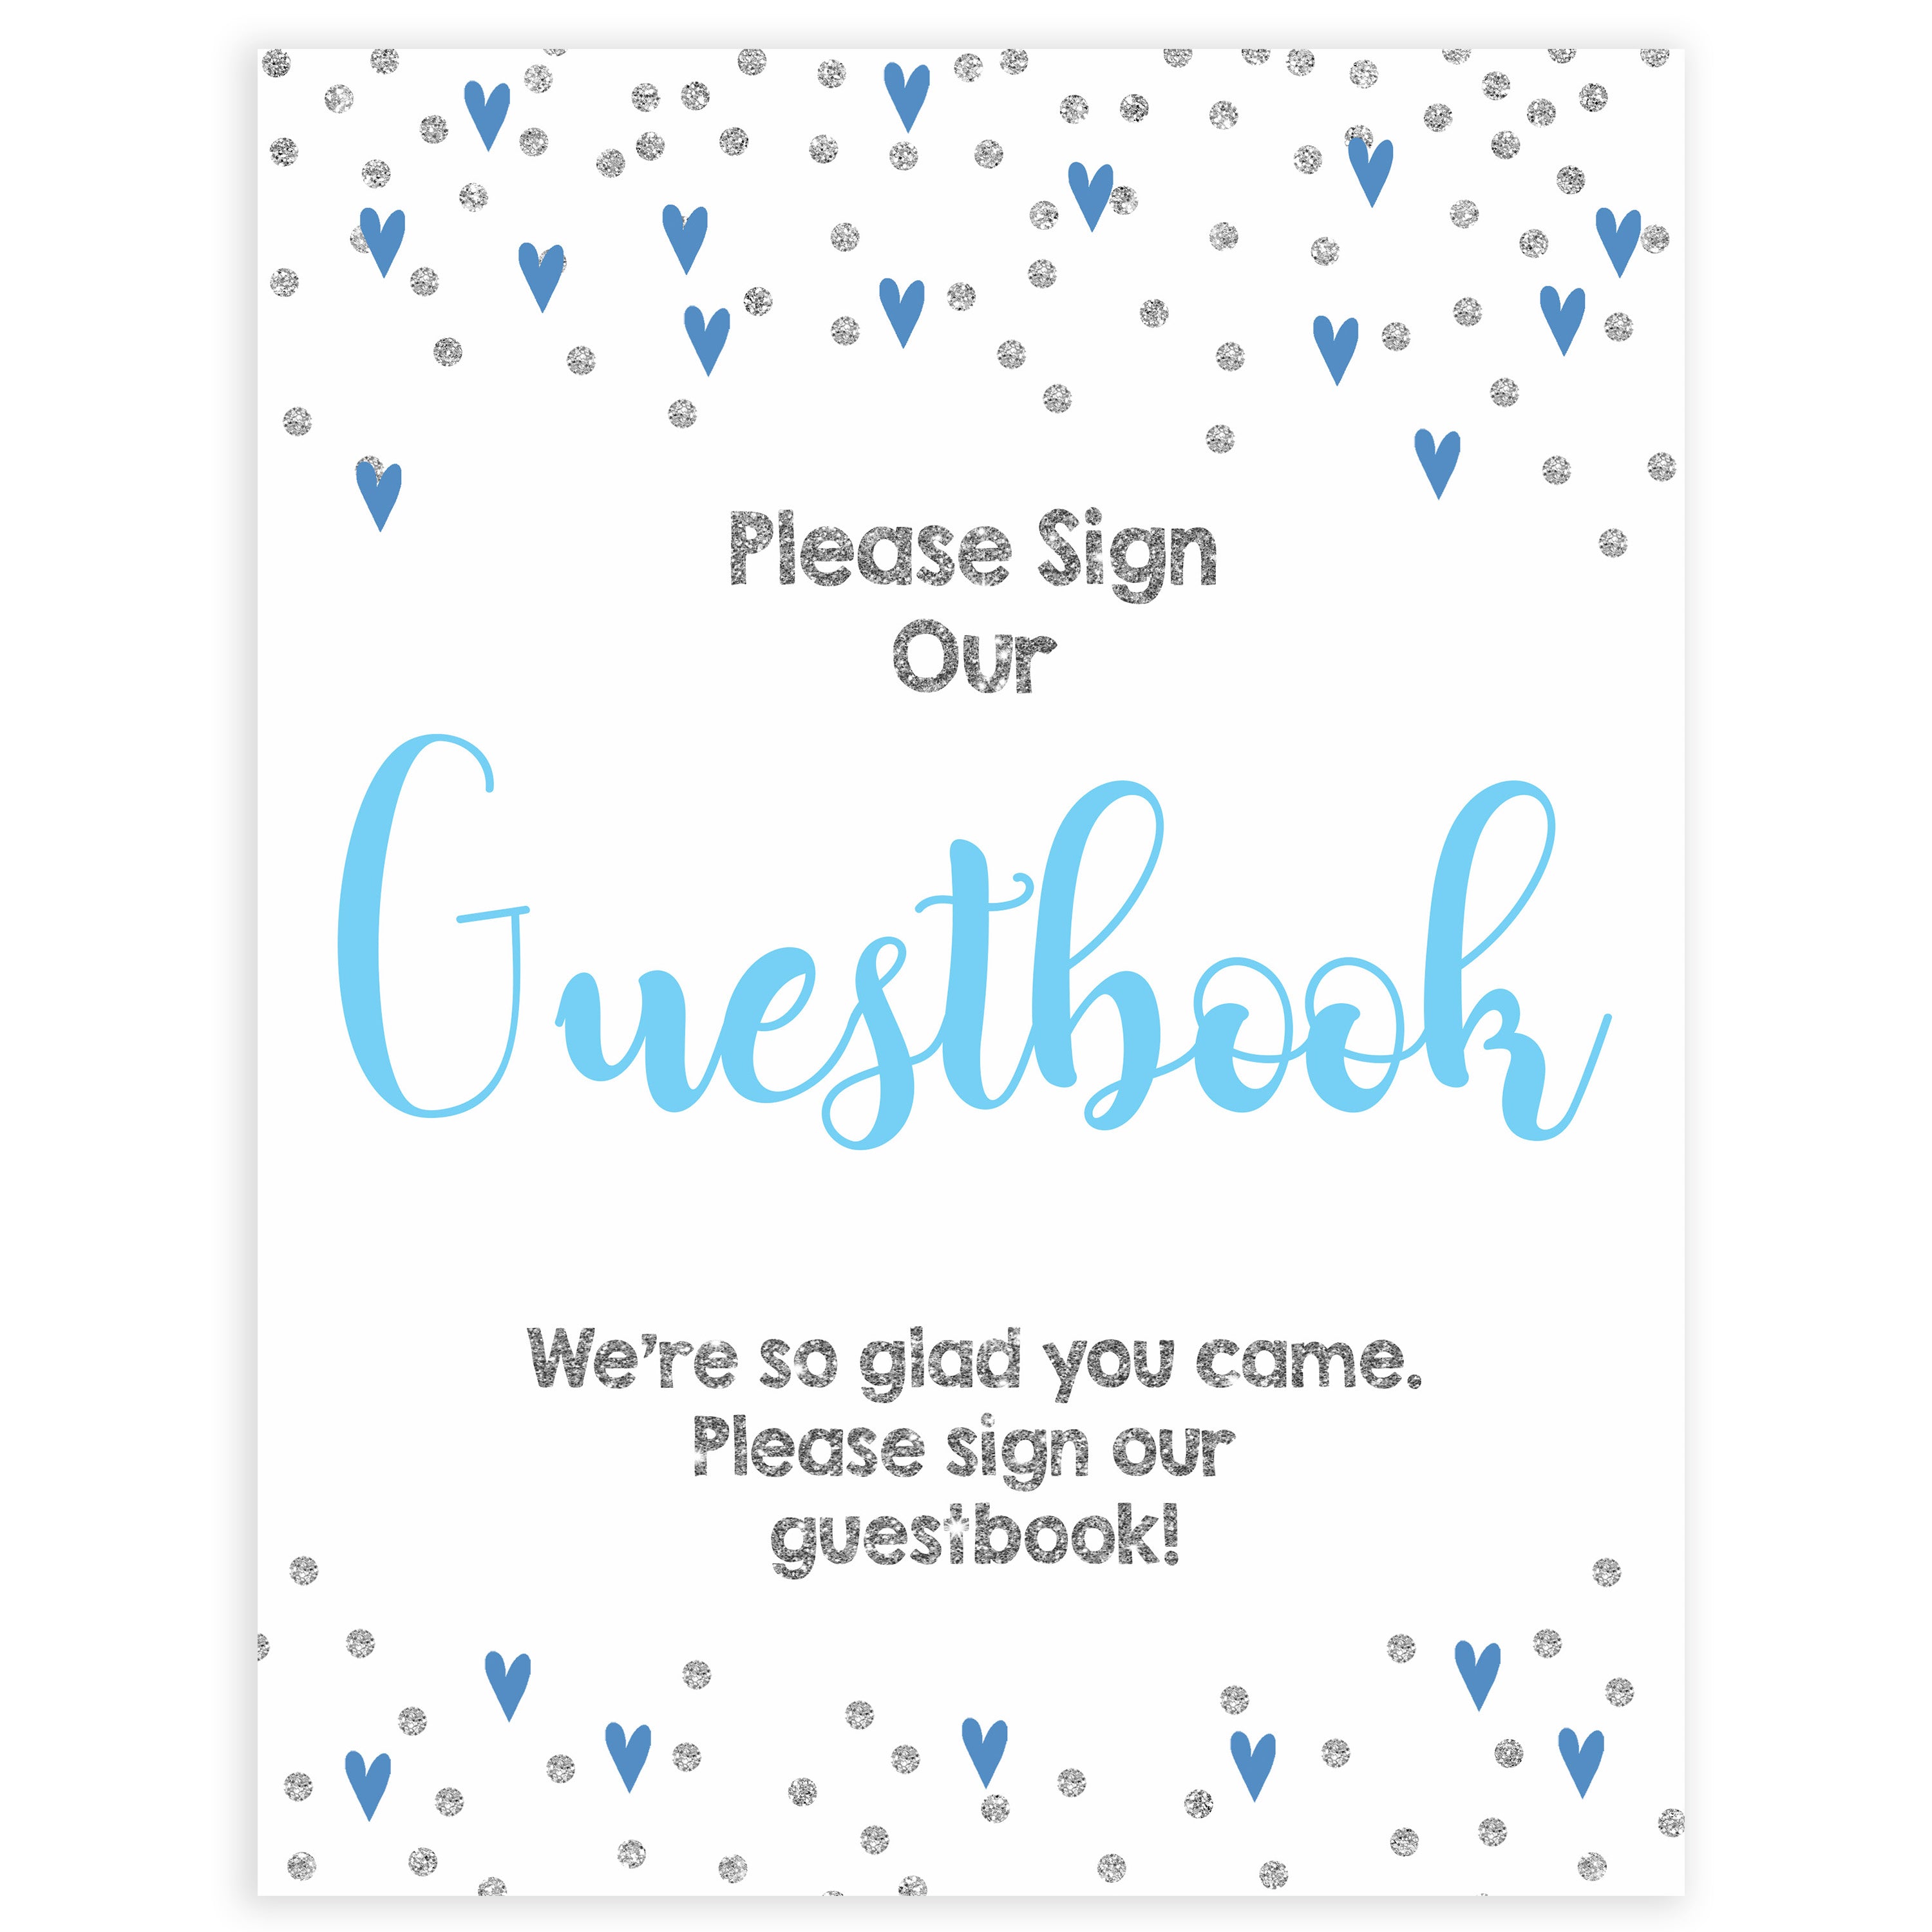 guestbook baby table sign, guestbook baby sign, Blue hearts baby decor, printable baby table signs, printable baby decor, silver glitter table signs, fun baby signs, blue hearts fun baby table signs